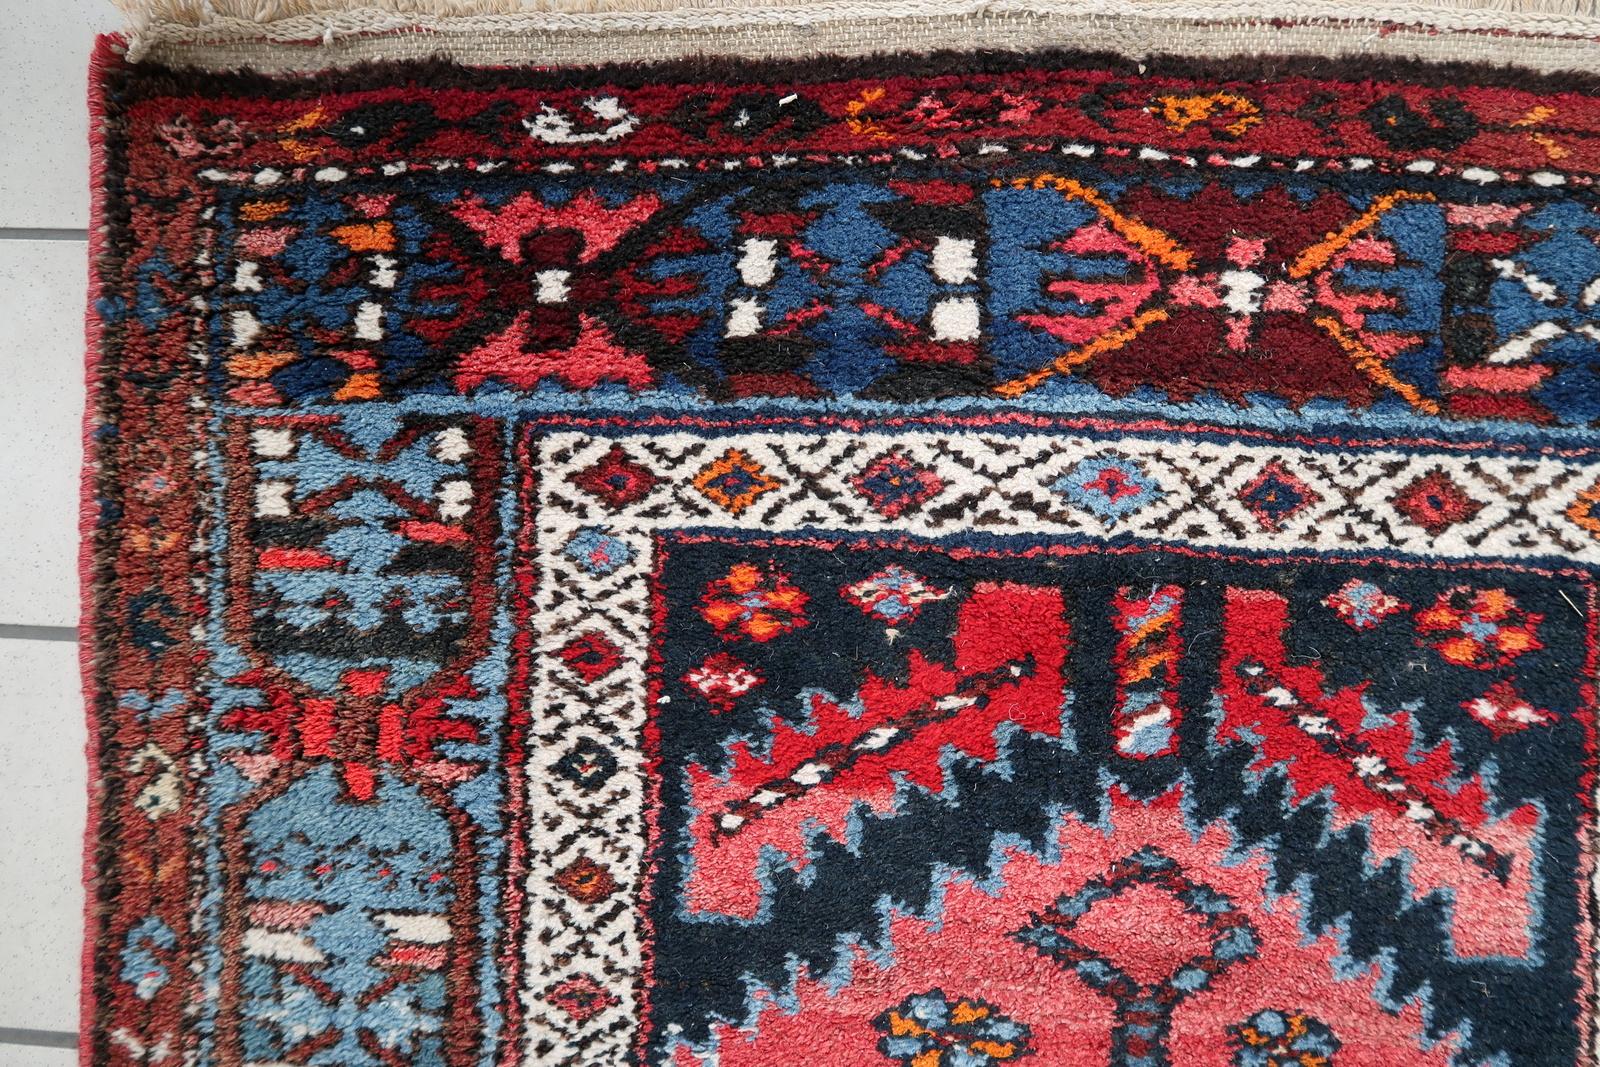 Introducing our exquisite Handmade Antique Persian Style Hamadan Runner Rug, a true masterpiece that encapsulates the charm and heritage of the 1920s. Crafted with exceptional care and attention to detail, this rug is in remarkably good condition, a